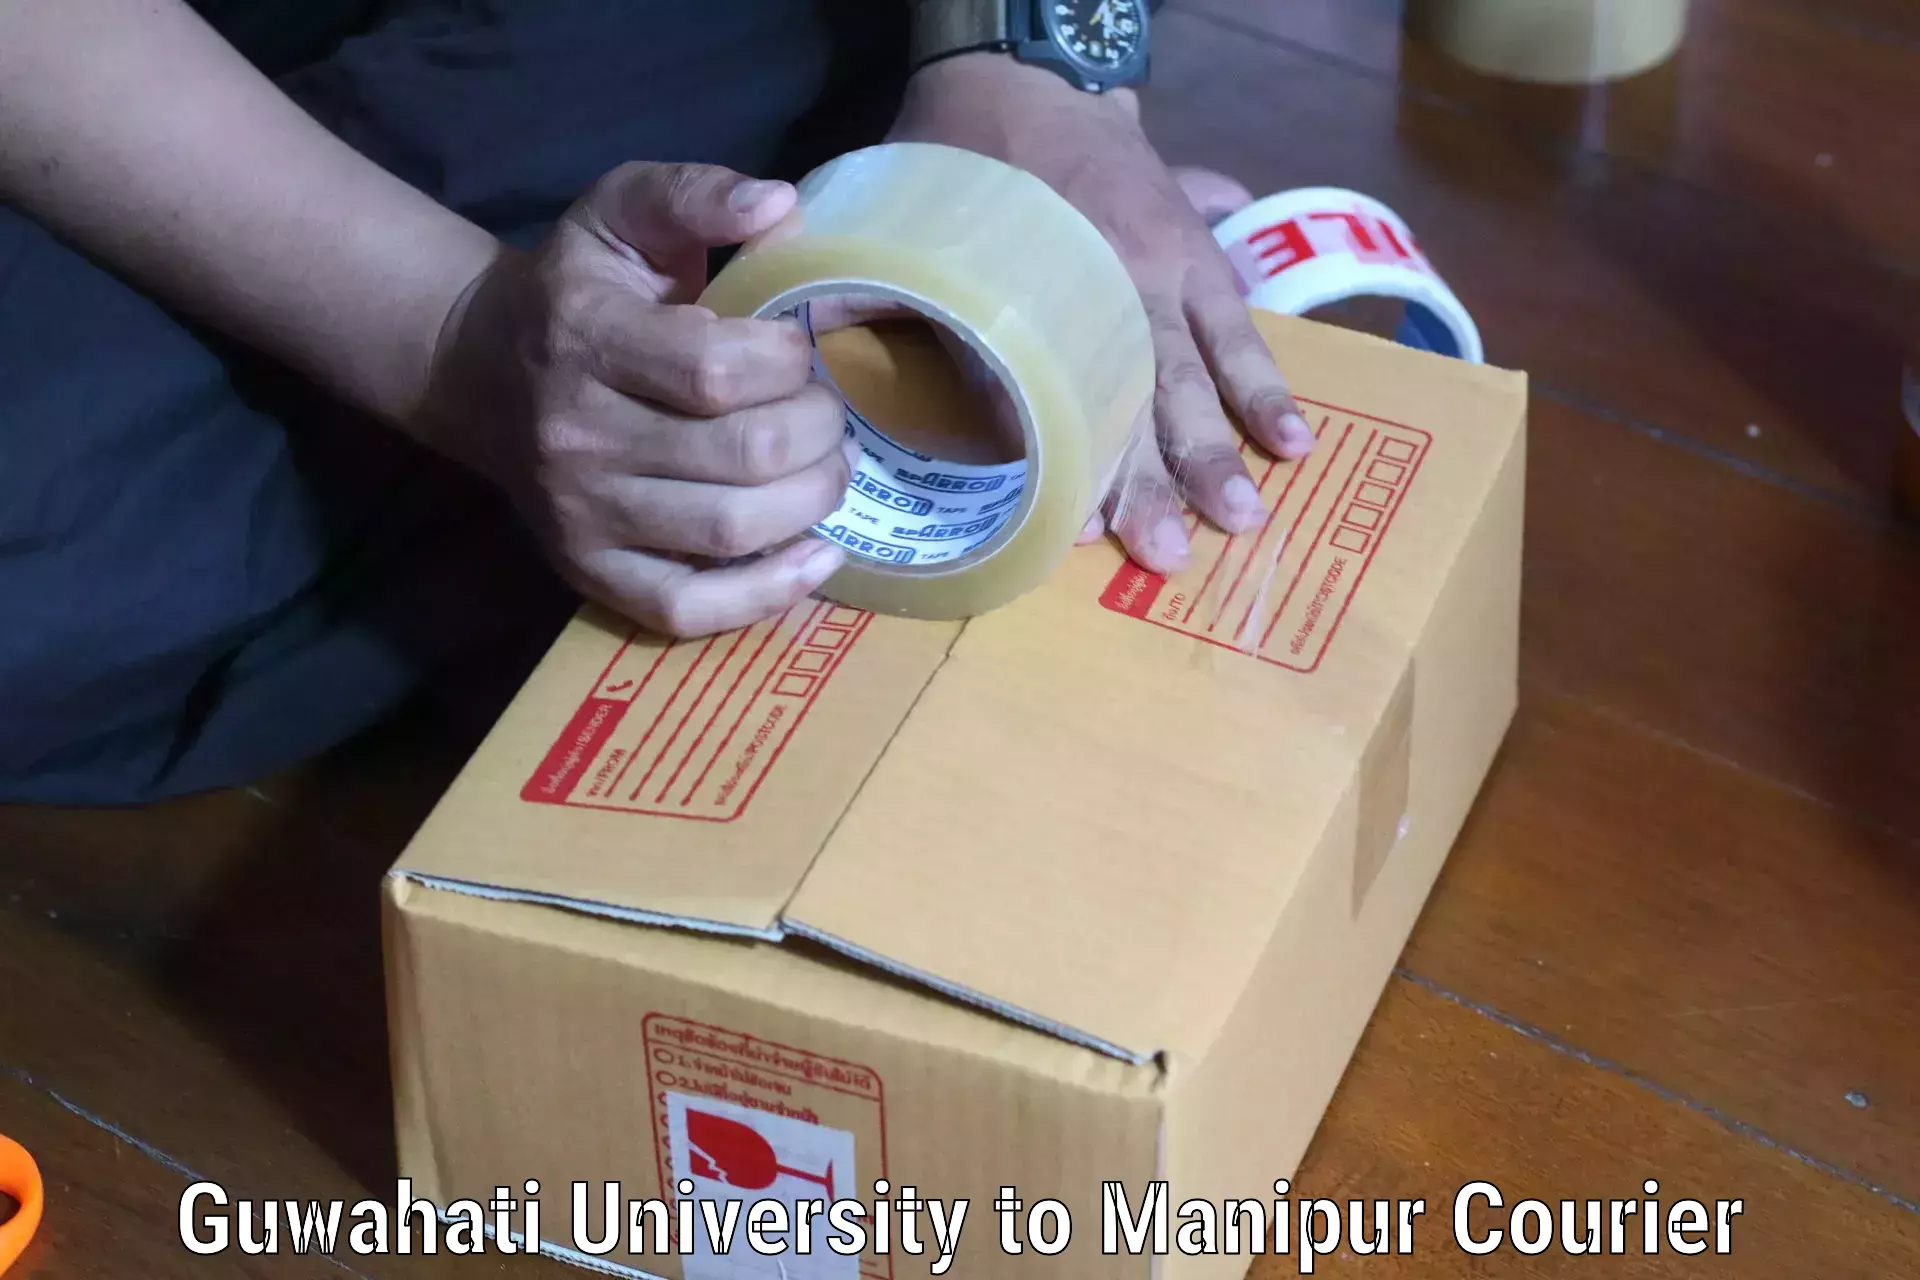 Reliable courier service in Guwahati University to Kangpokpi